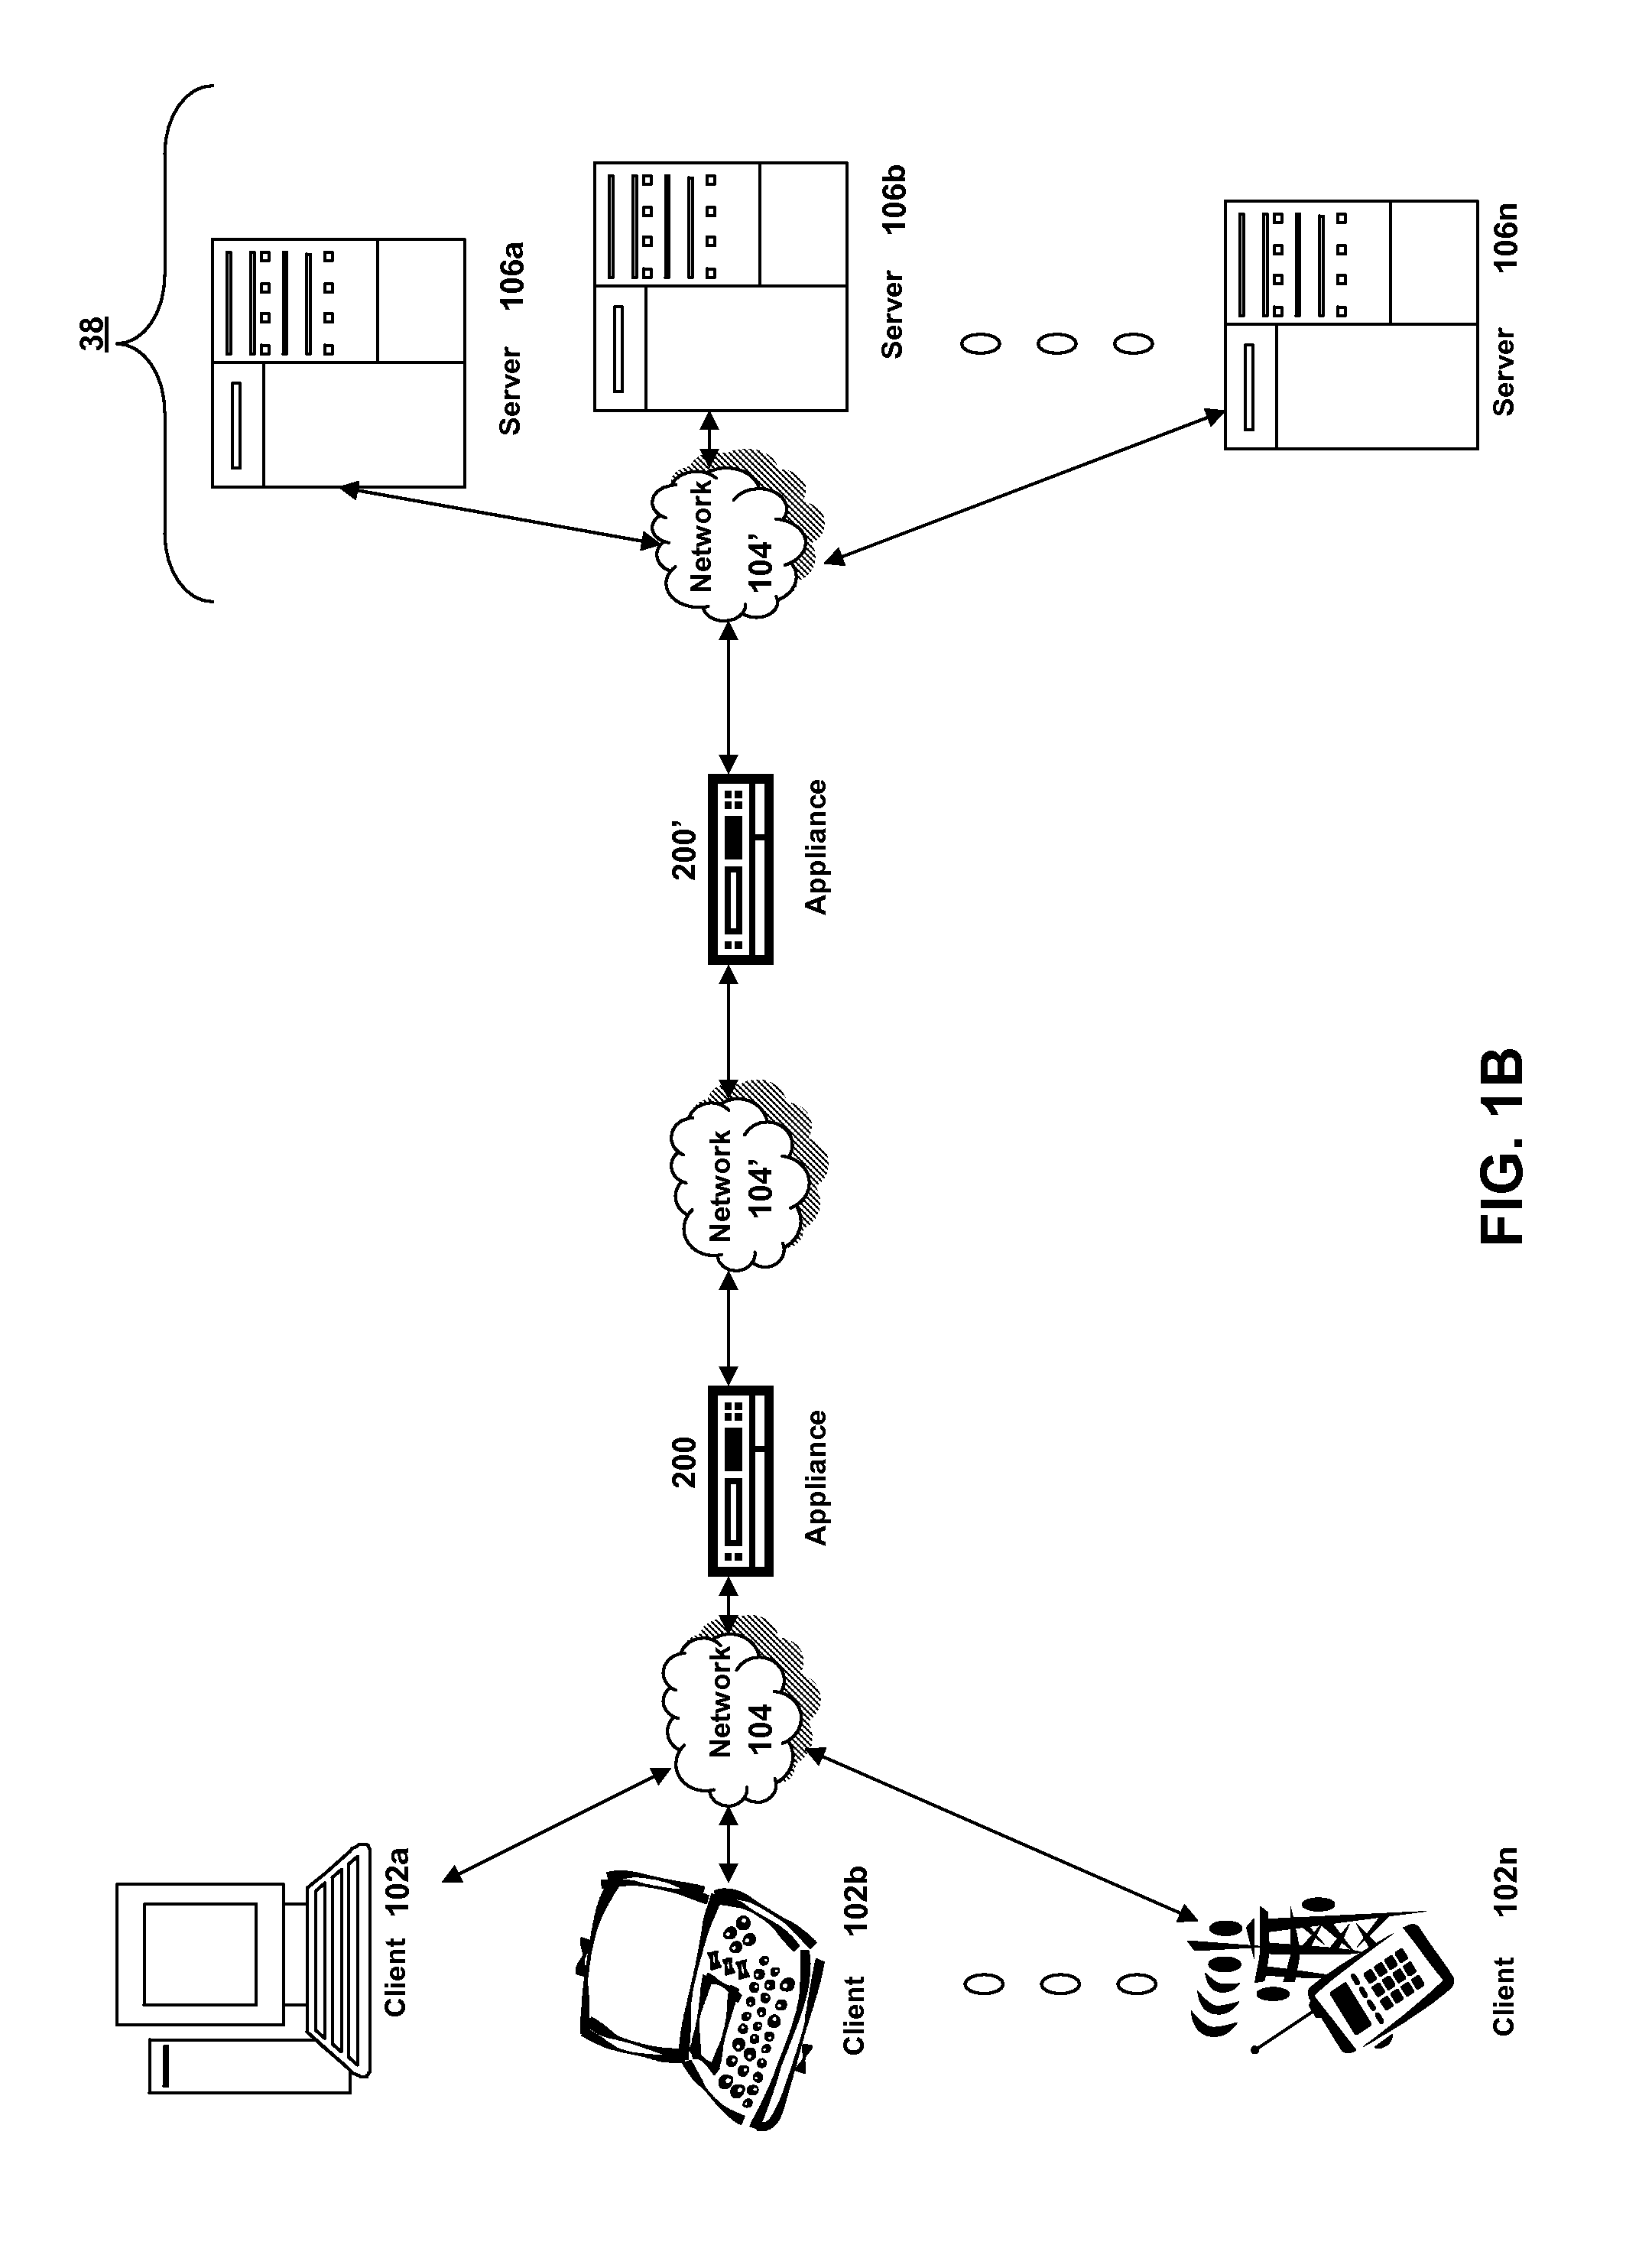 Systems and methods for managing cookies via HTTP content layer